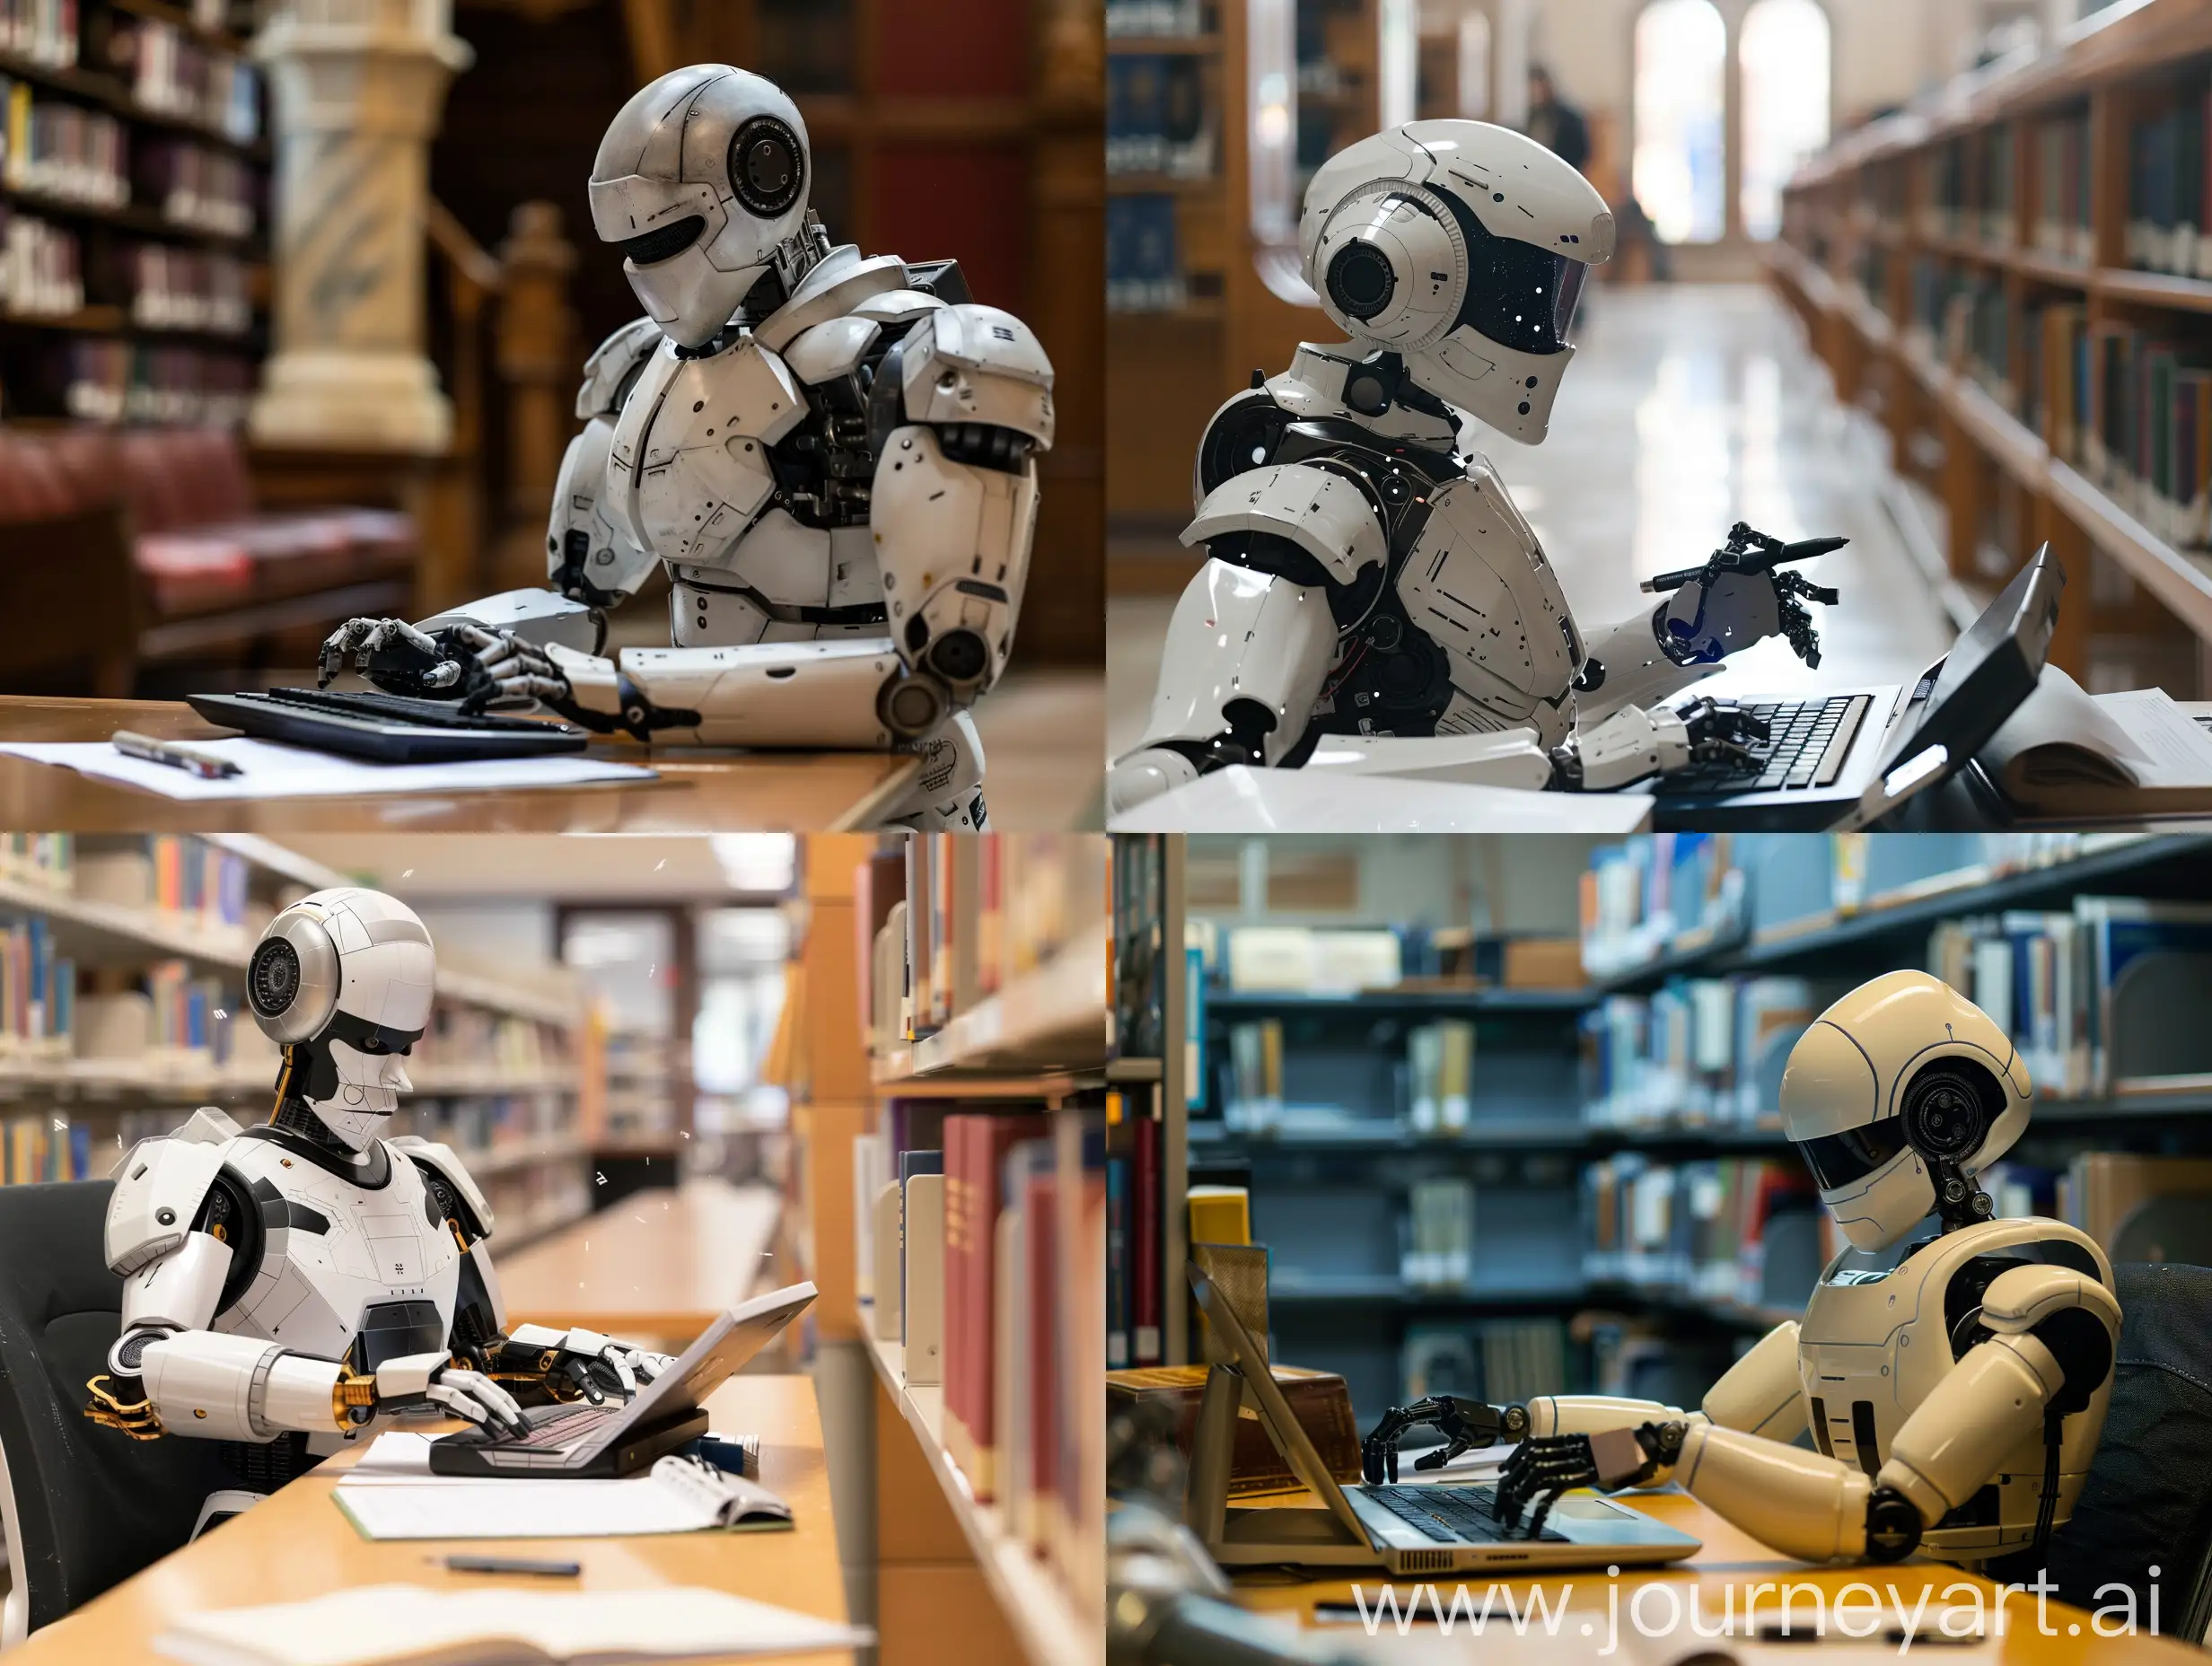 AI-Robot-Engaged-in-Academic-Endeavor-at-the-Library